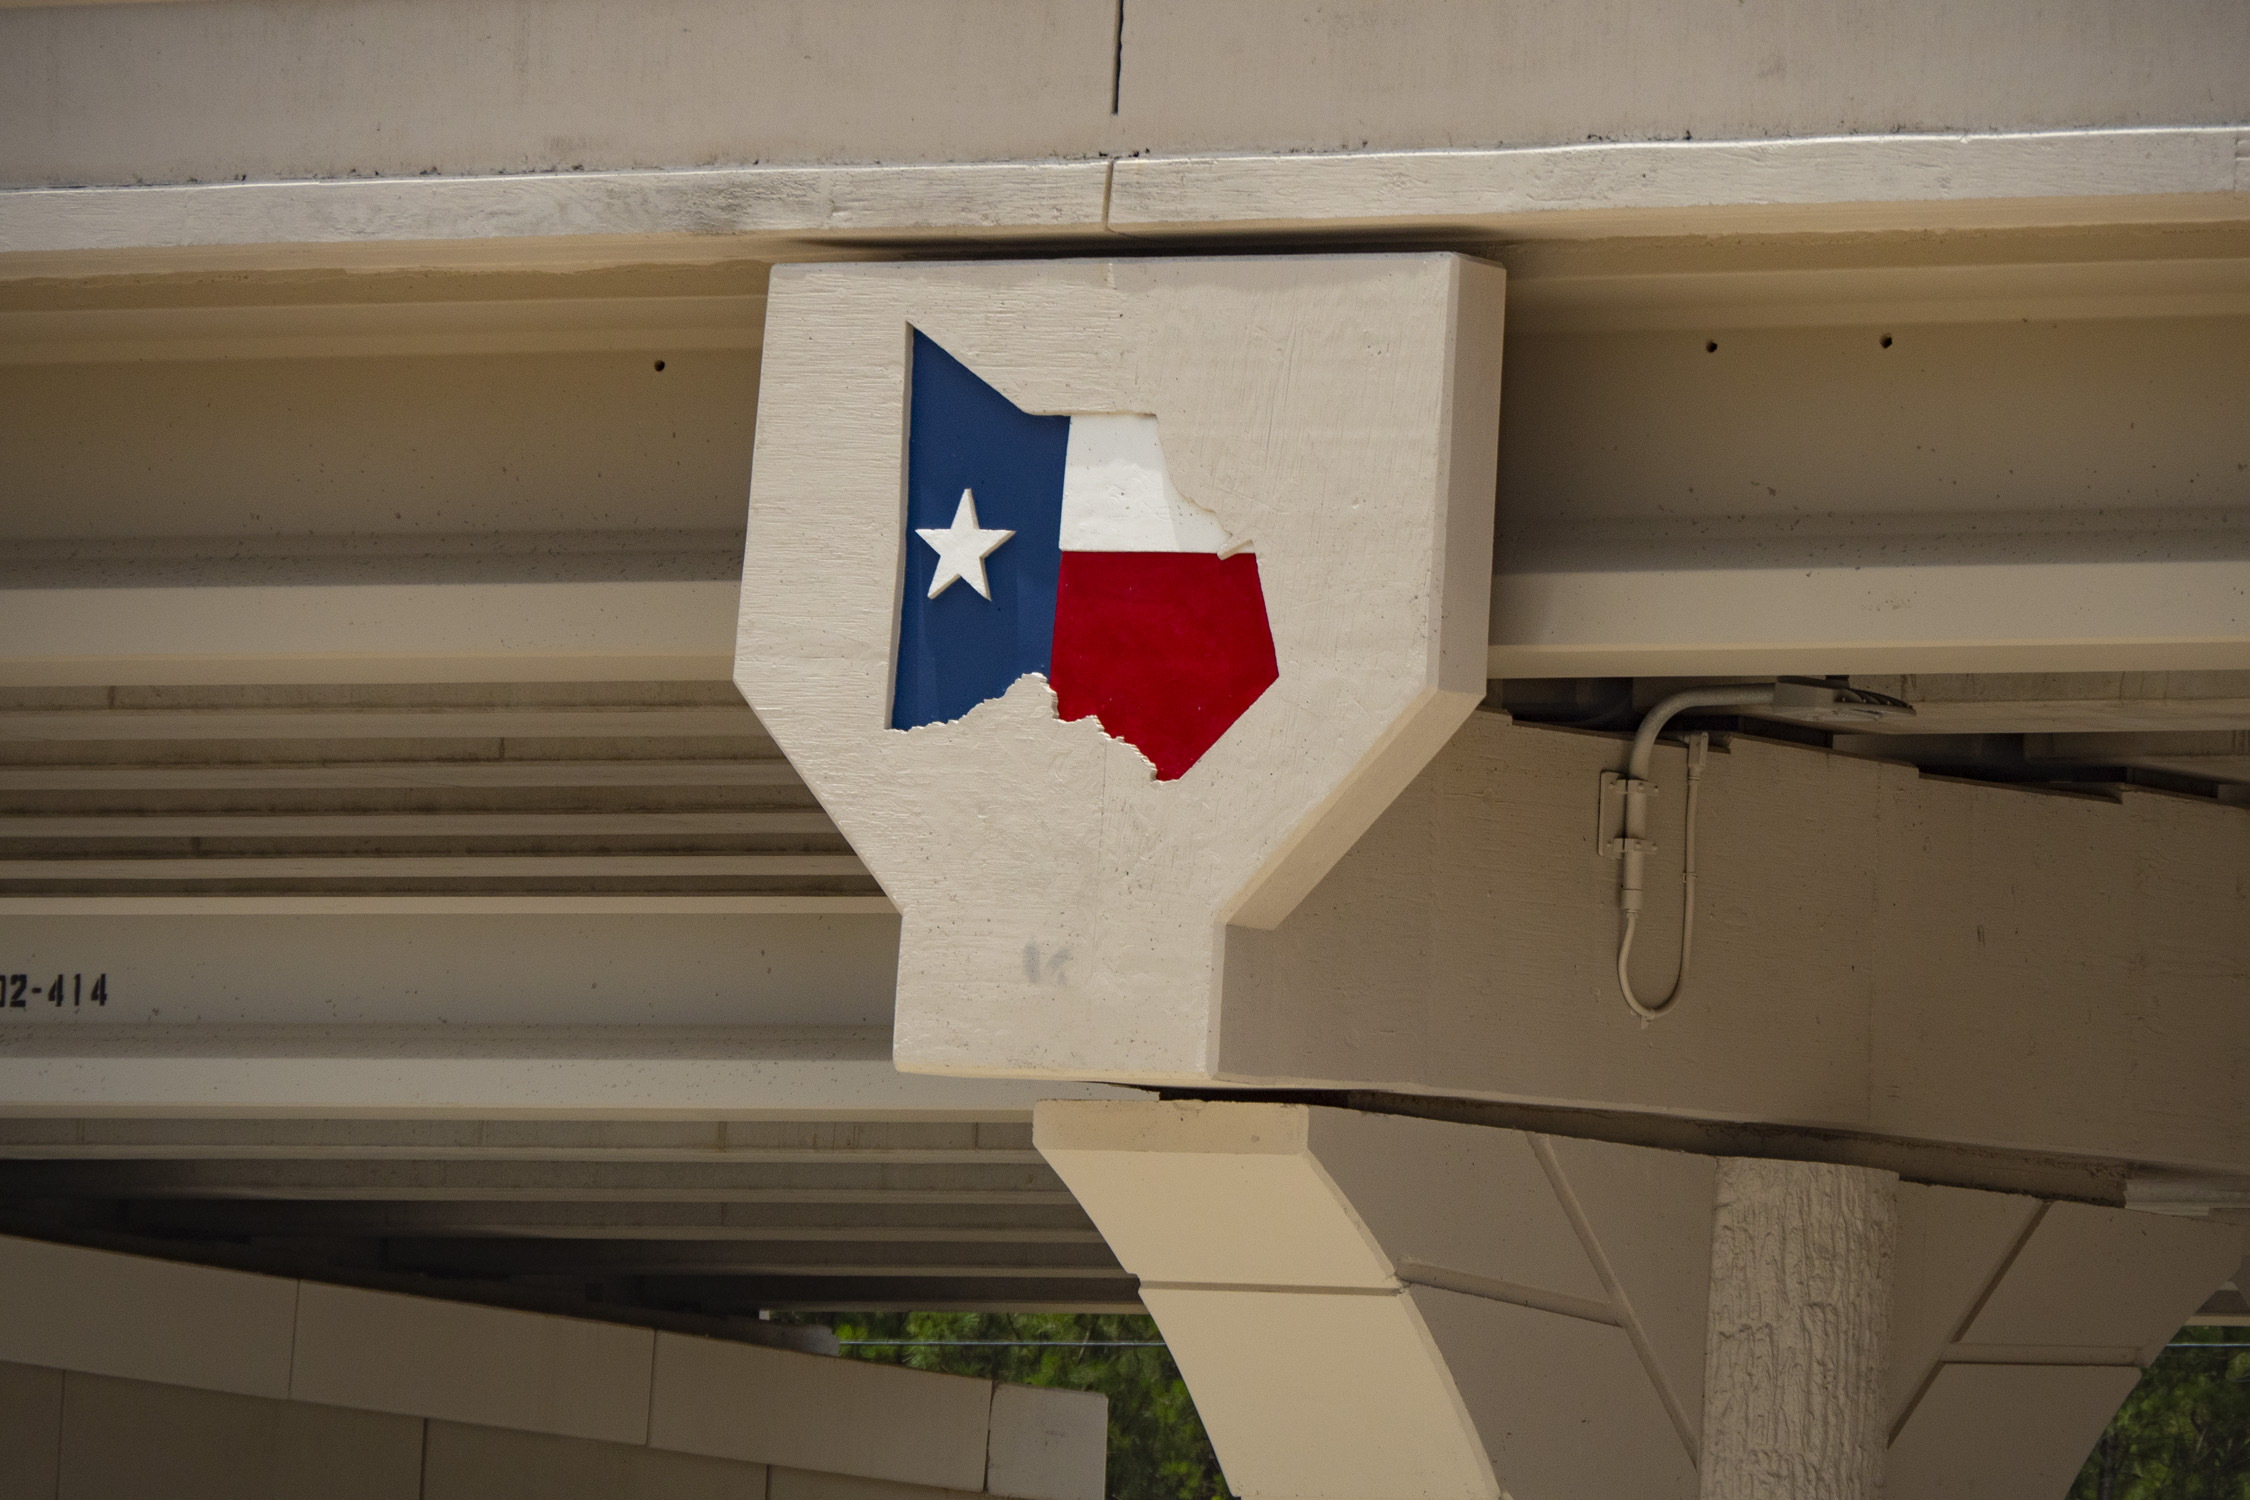 Decorative support at SH 249 Tomball Tollway